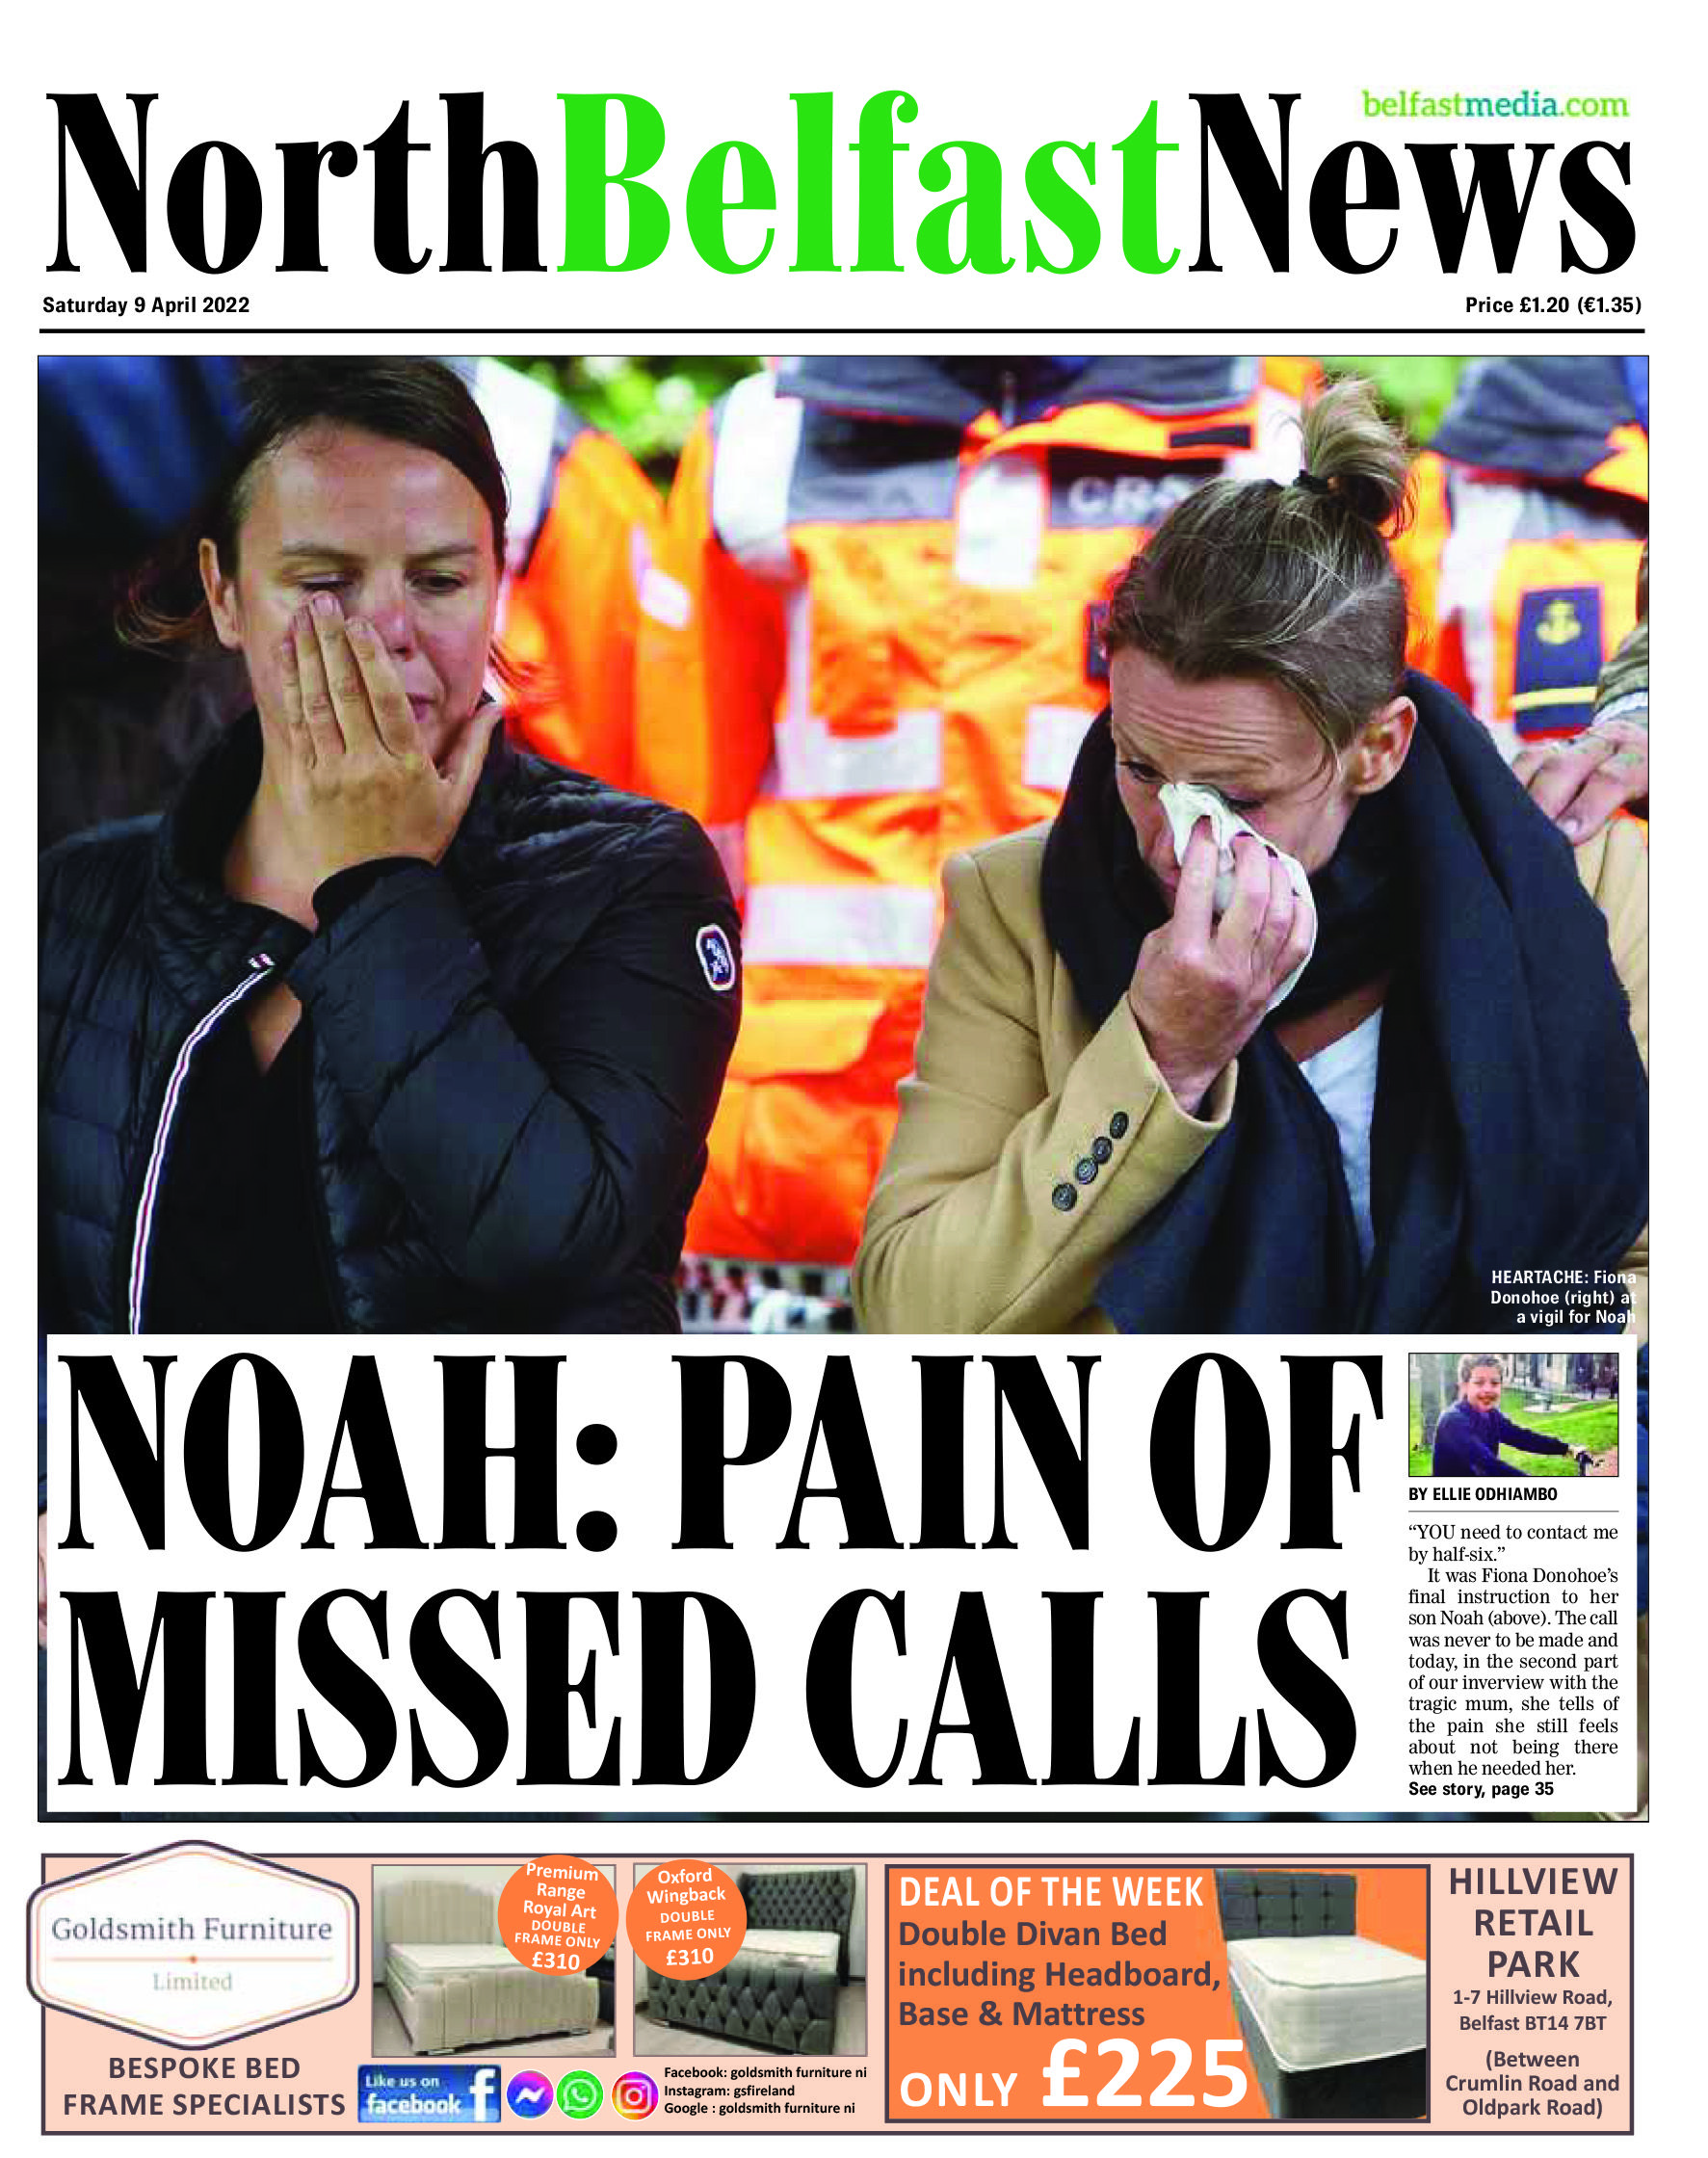 North front page